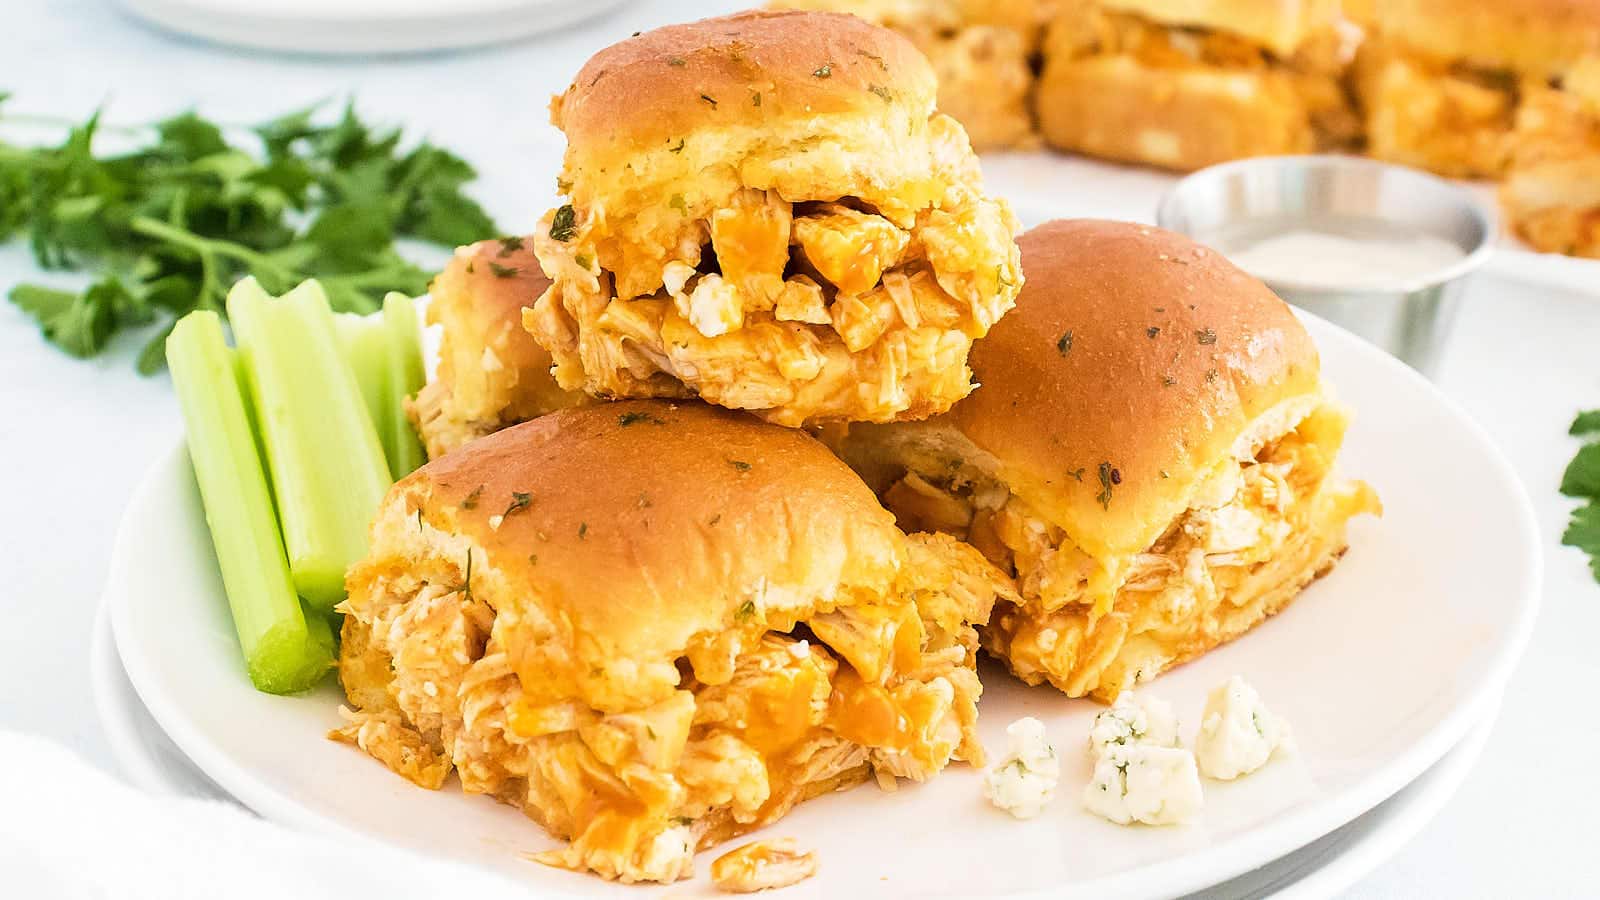 Buffalo Chicken Sliders on a plate with celery.